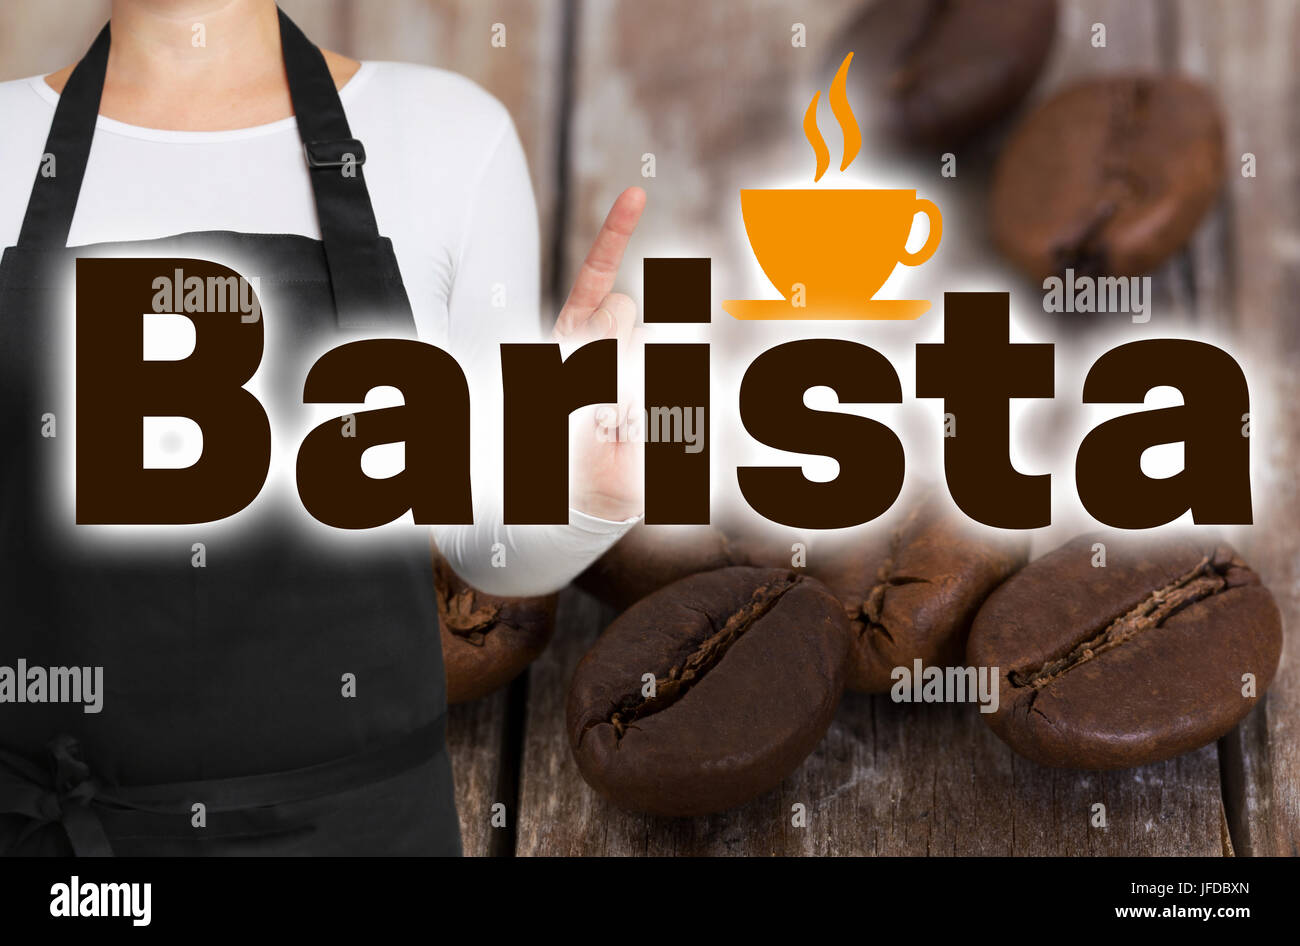 Barista concept is shown by coffee roaster. Stock Photo